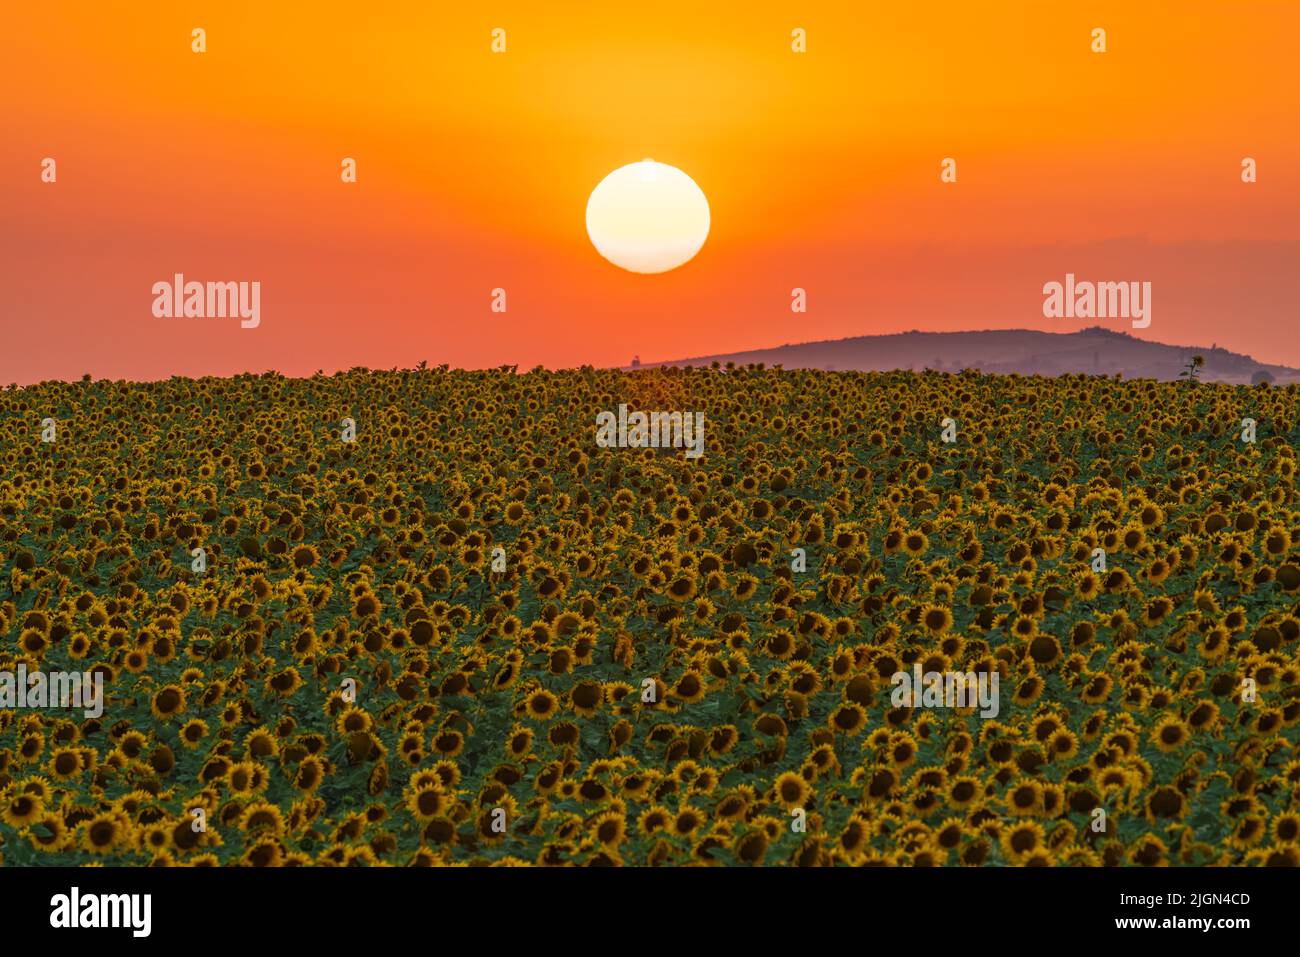 Sunflower field at sunset time Stock Photo